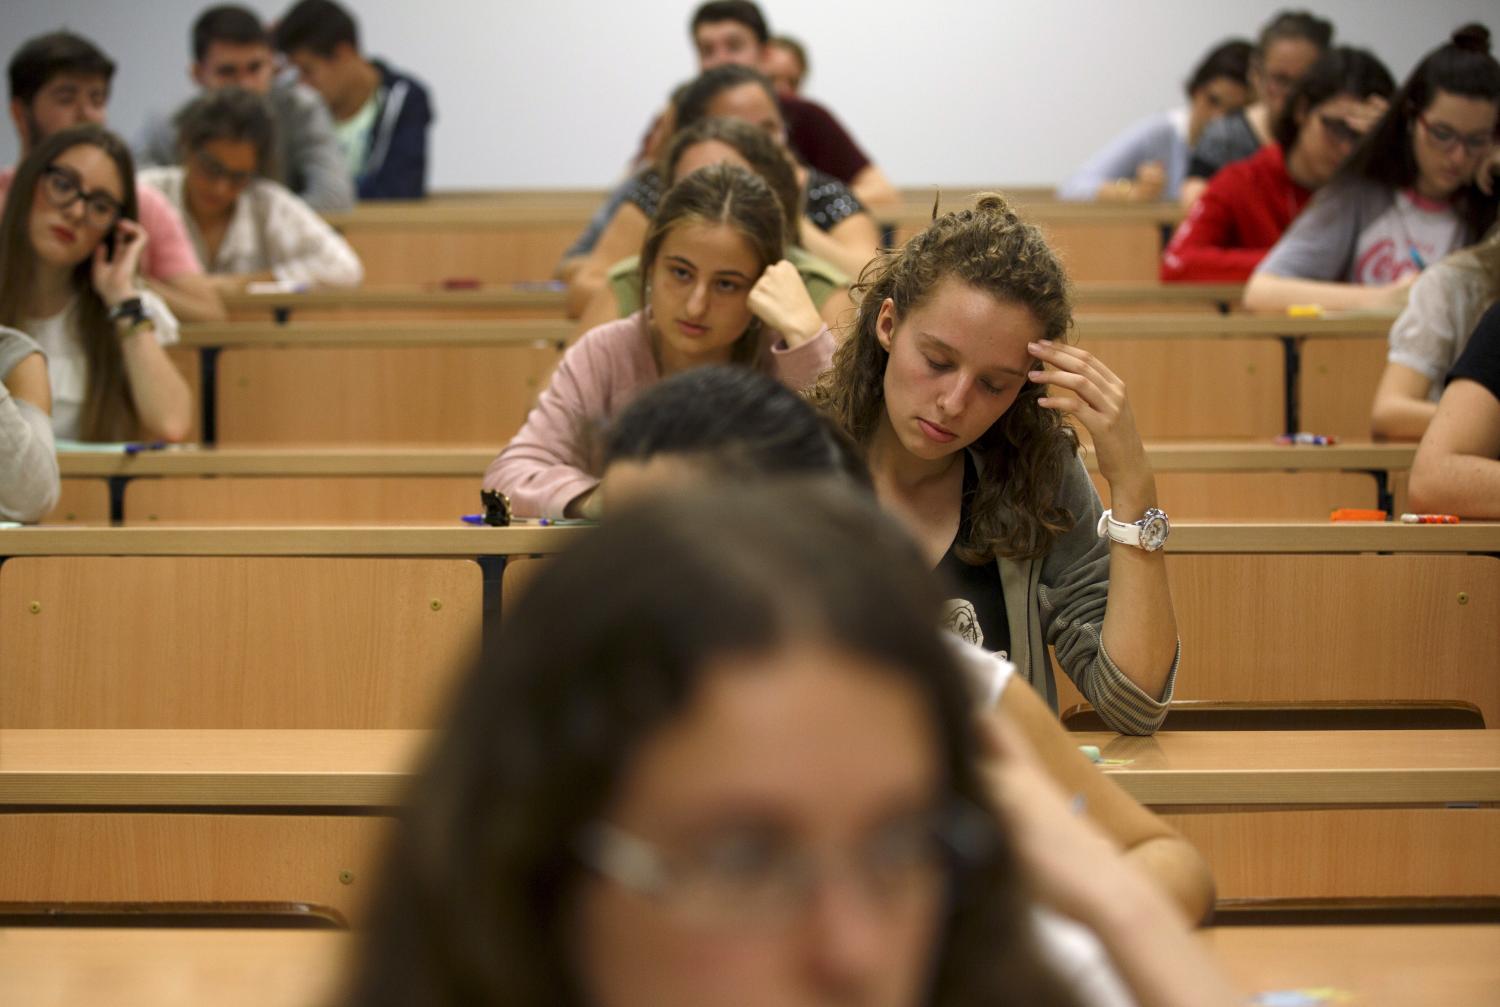 Students sit for a university entrance examination at a lecture hall in the Andalusian capital of Seville, southern Spain, June 16, 2015. Students in Spain must pass the exam after completing secondary school in order to gain access to university.  REUTERS/Marcelo del Pozo - GF10000129149